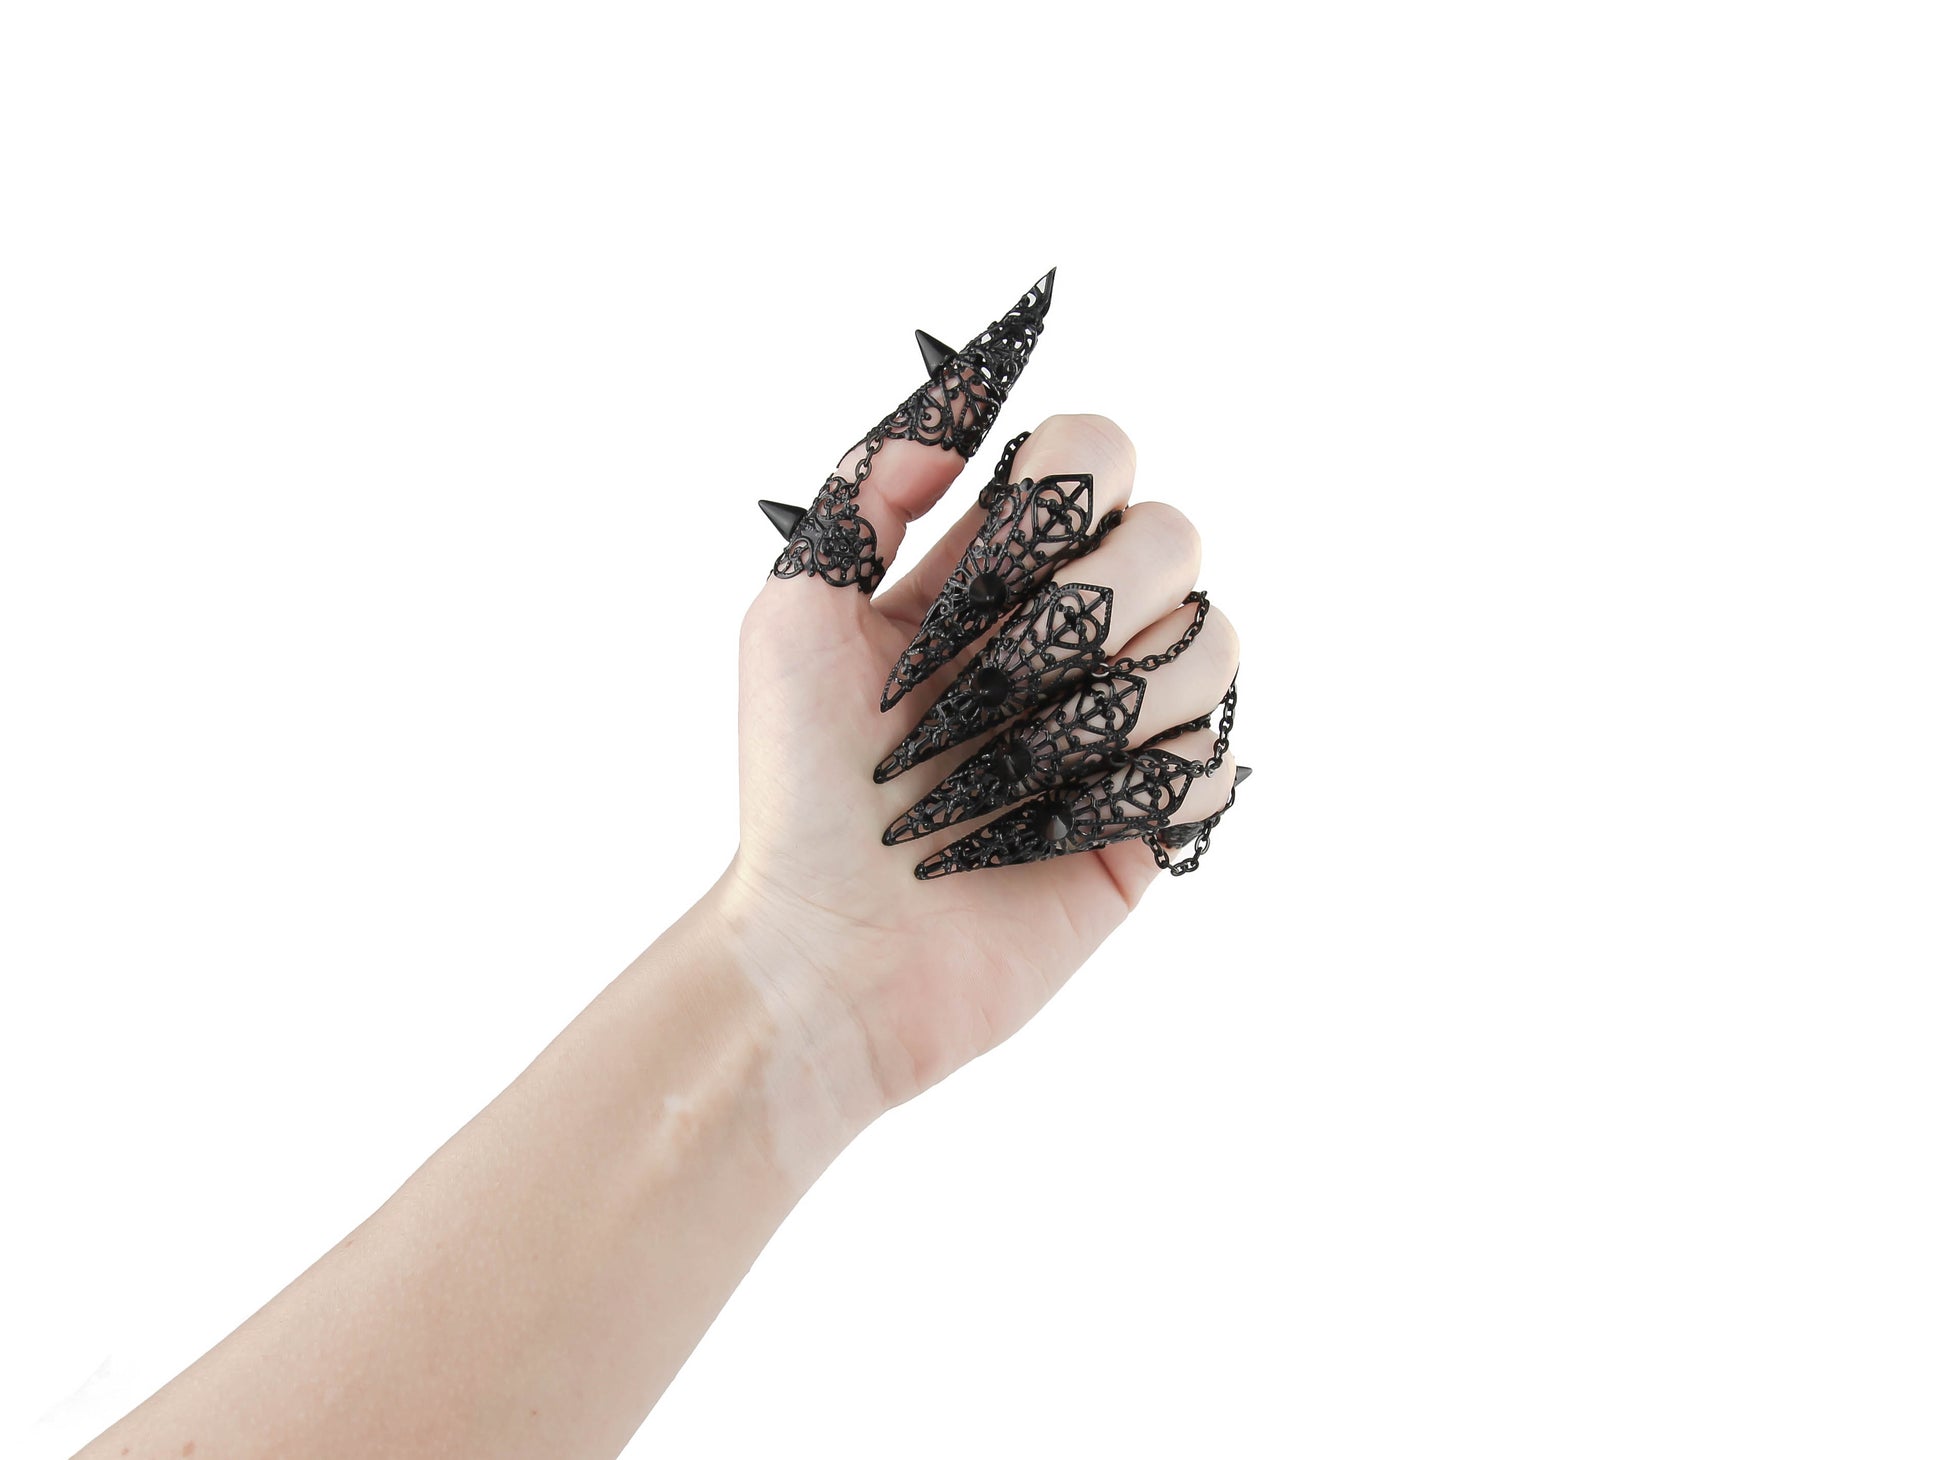 A set of black claw rings with studs adorns a hand, exemplifying the dark-avantgarde style of Myril Jewels. These bold, neo-gothic pieces are a fit for Halloween, adding a punk edge to gothic-chic looks, perfect for the fashion-forward goth girlfriend or as a daring festival jewel.